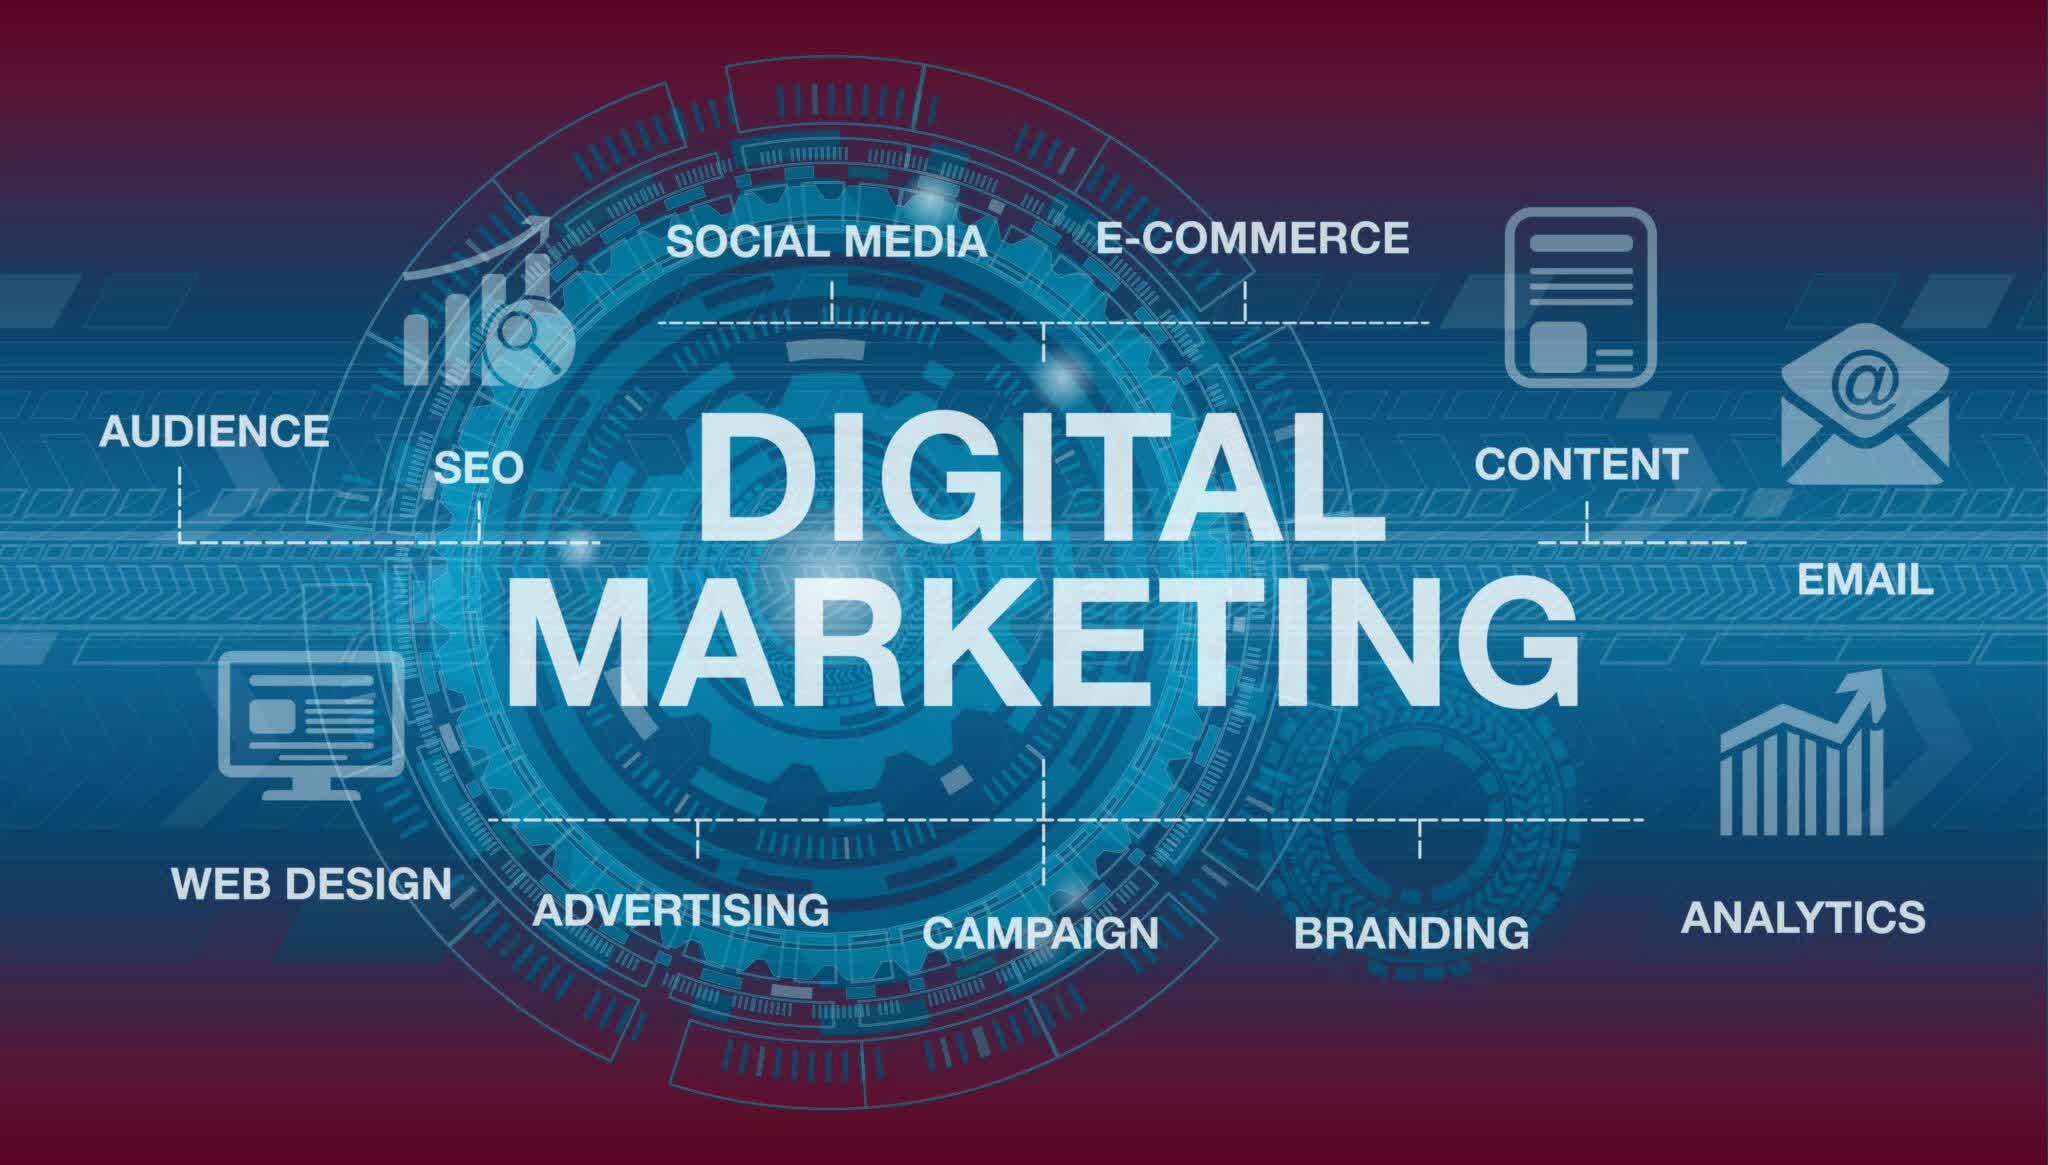 Banner of Digital Marketing banner with the text 'Digital Marketing' in the center surrounded by icons and text including Social Media, E-commerce, SEO, Web Design, and Analytics